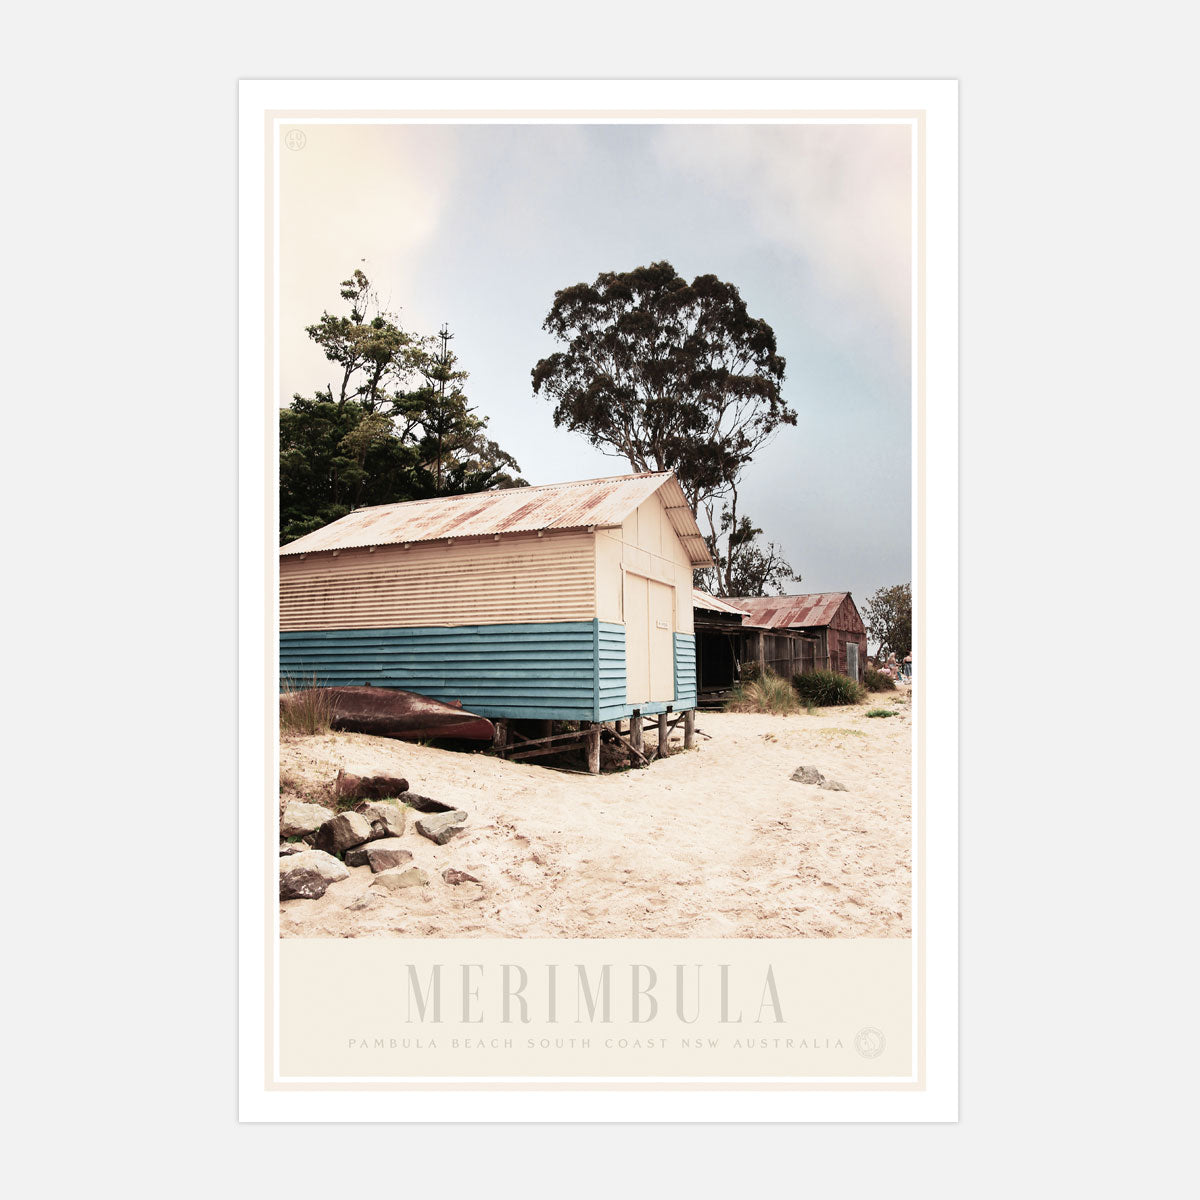 Merimbula NSW vintage retro travel poster from Places We Luv